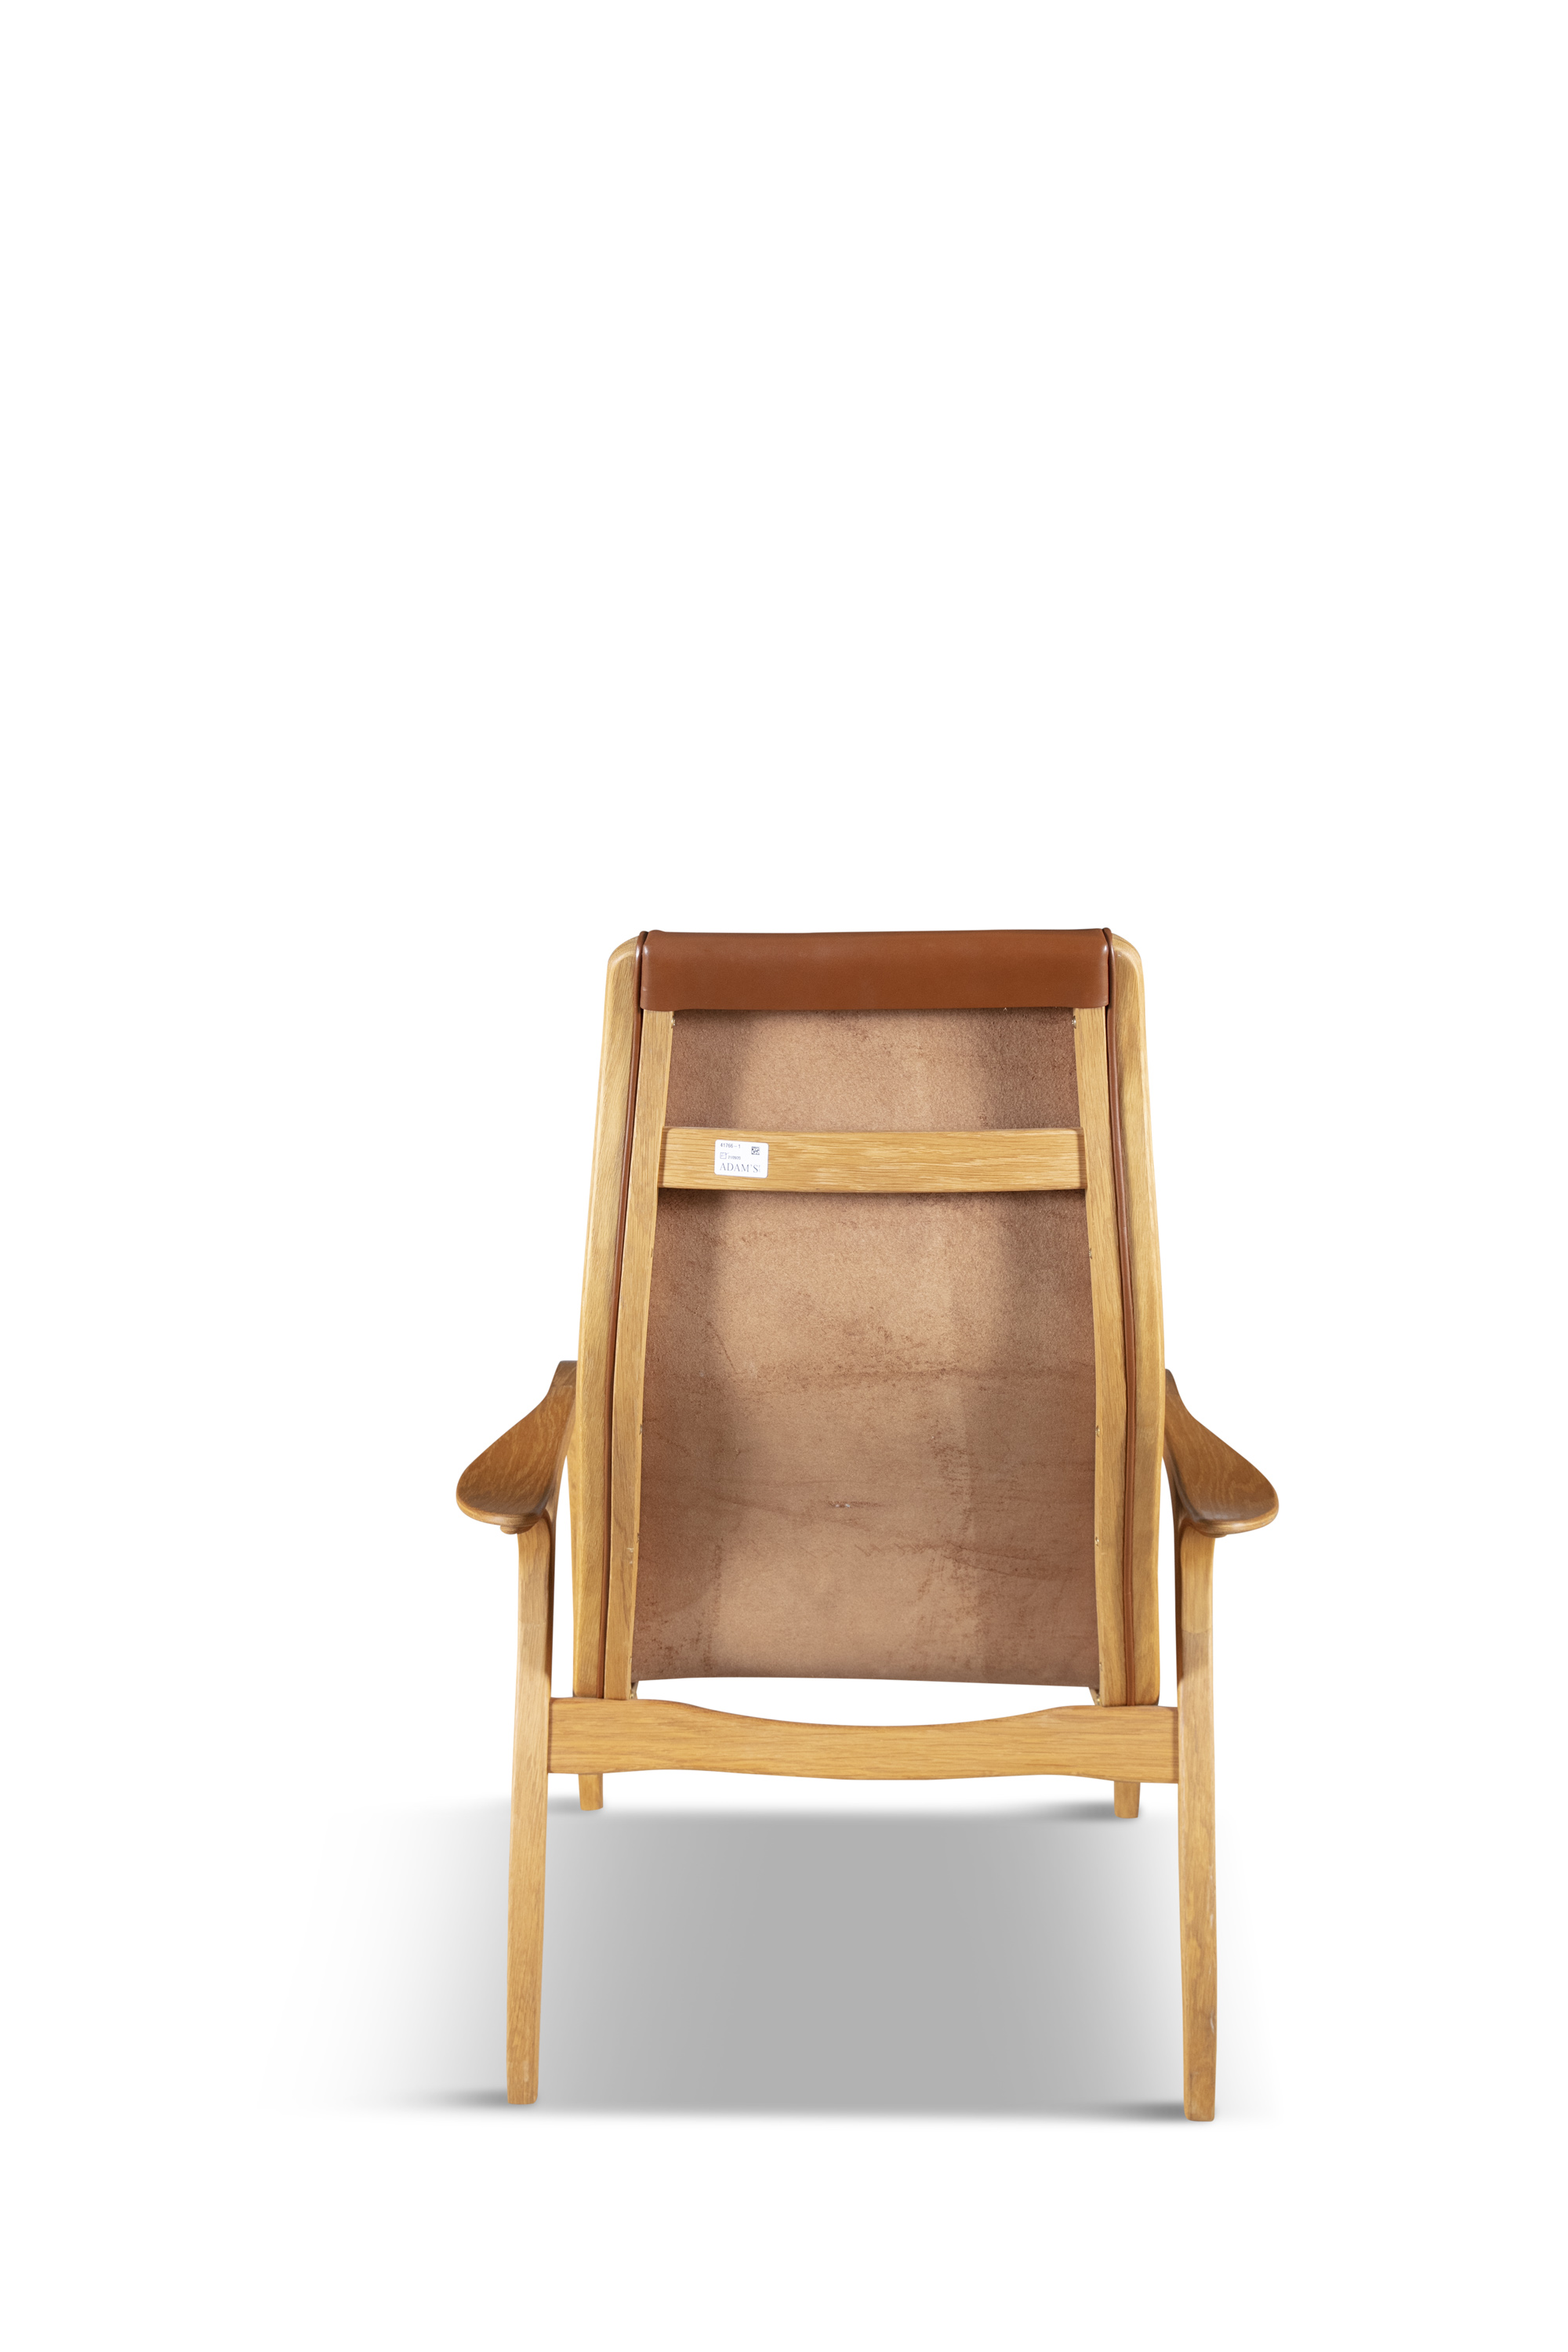 YNGVE EKSTROM (1913-1988) A lamino chair and foot stool, designed by Yngve Ekstrom and produced by - Image 4 of 4